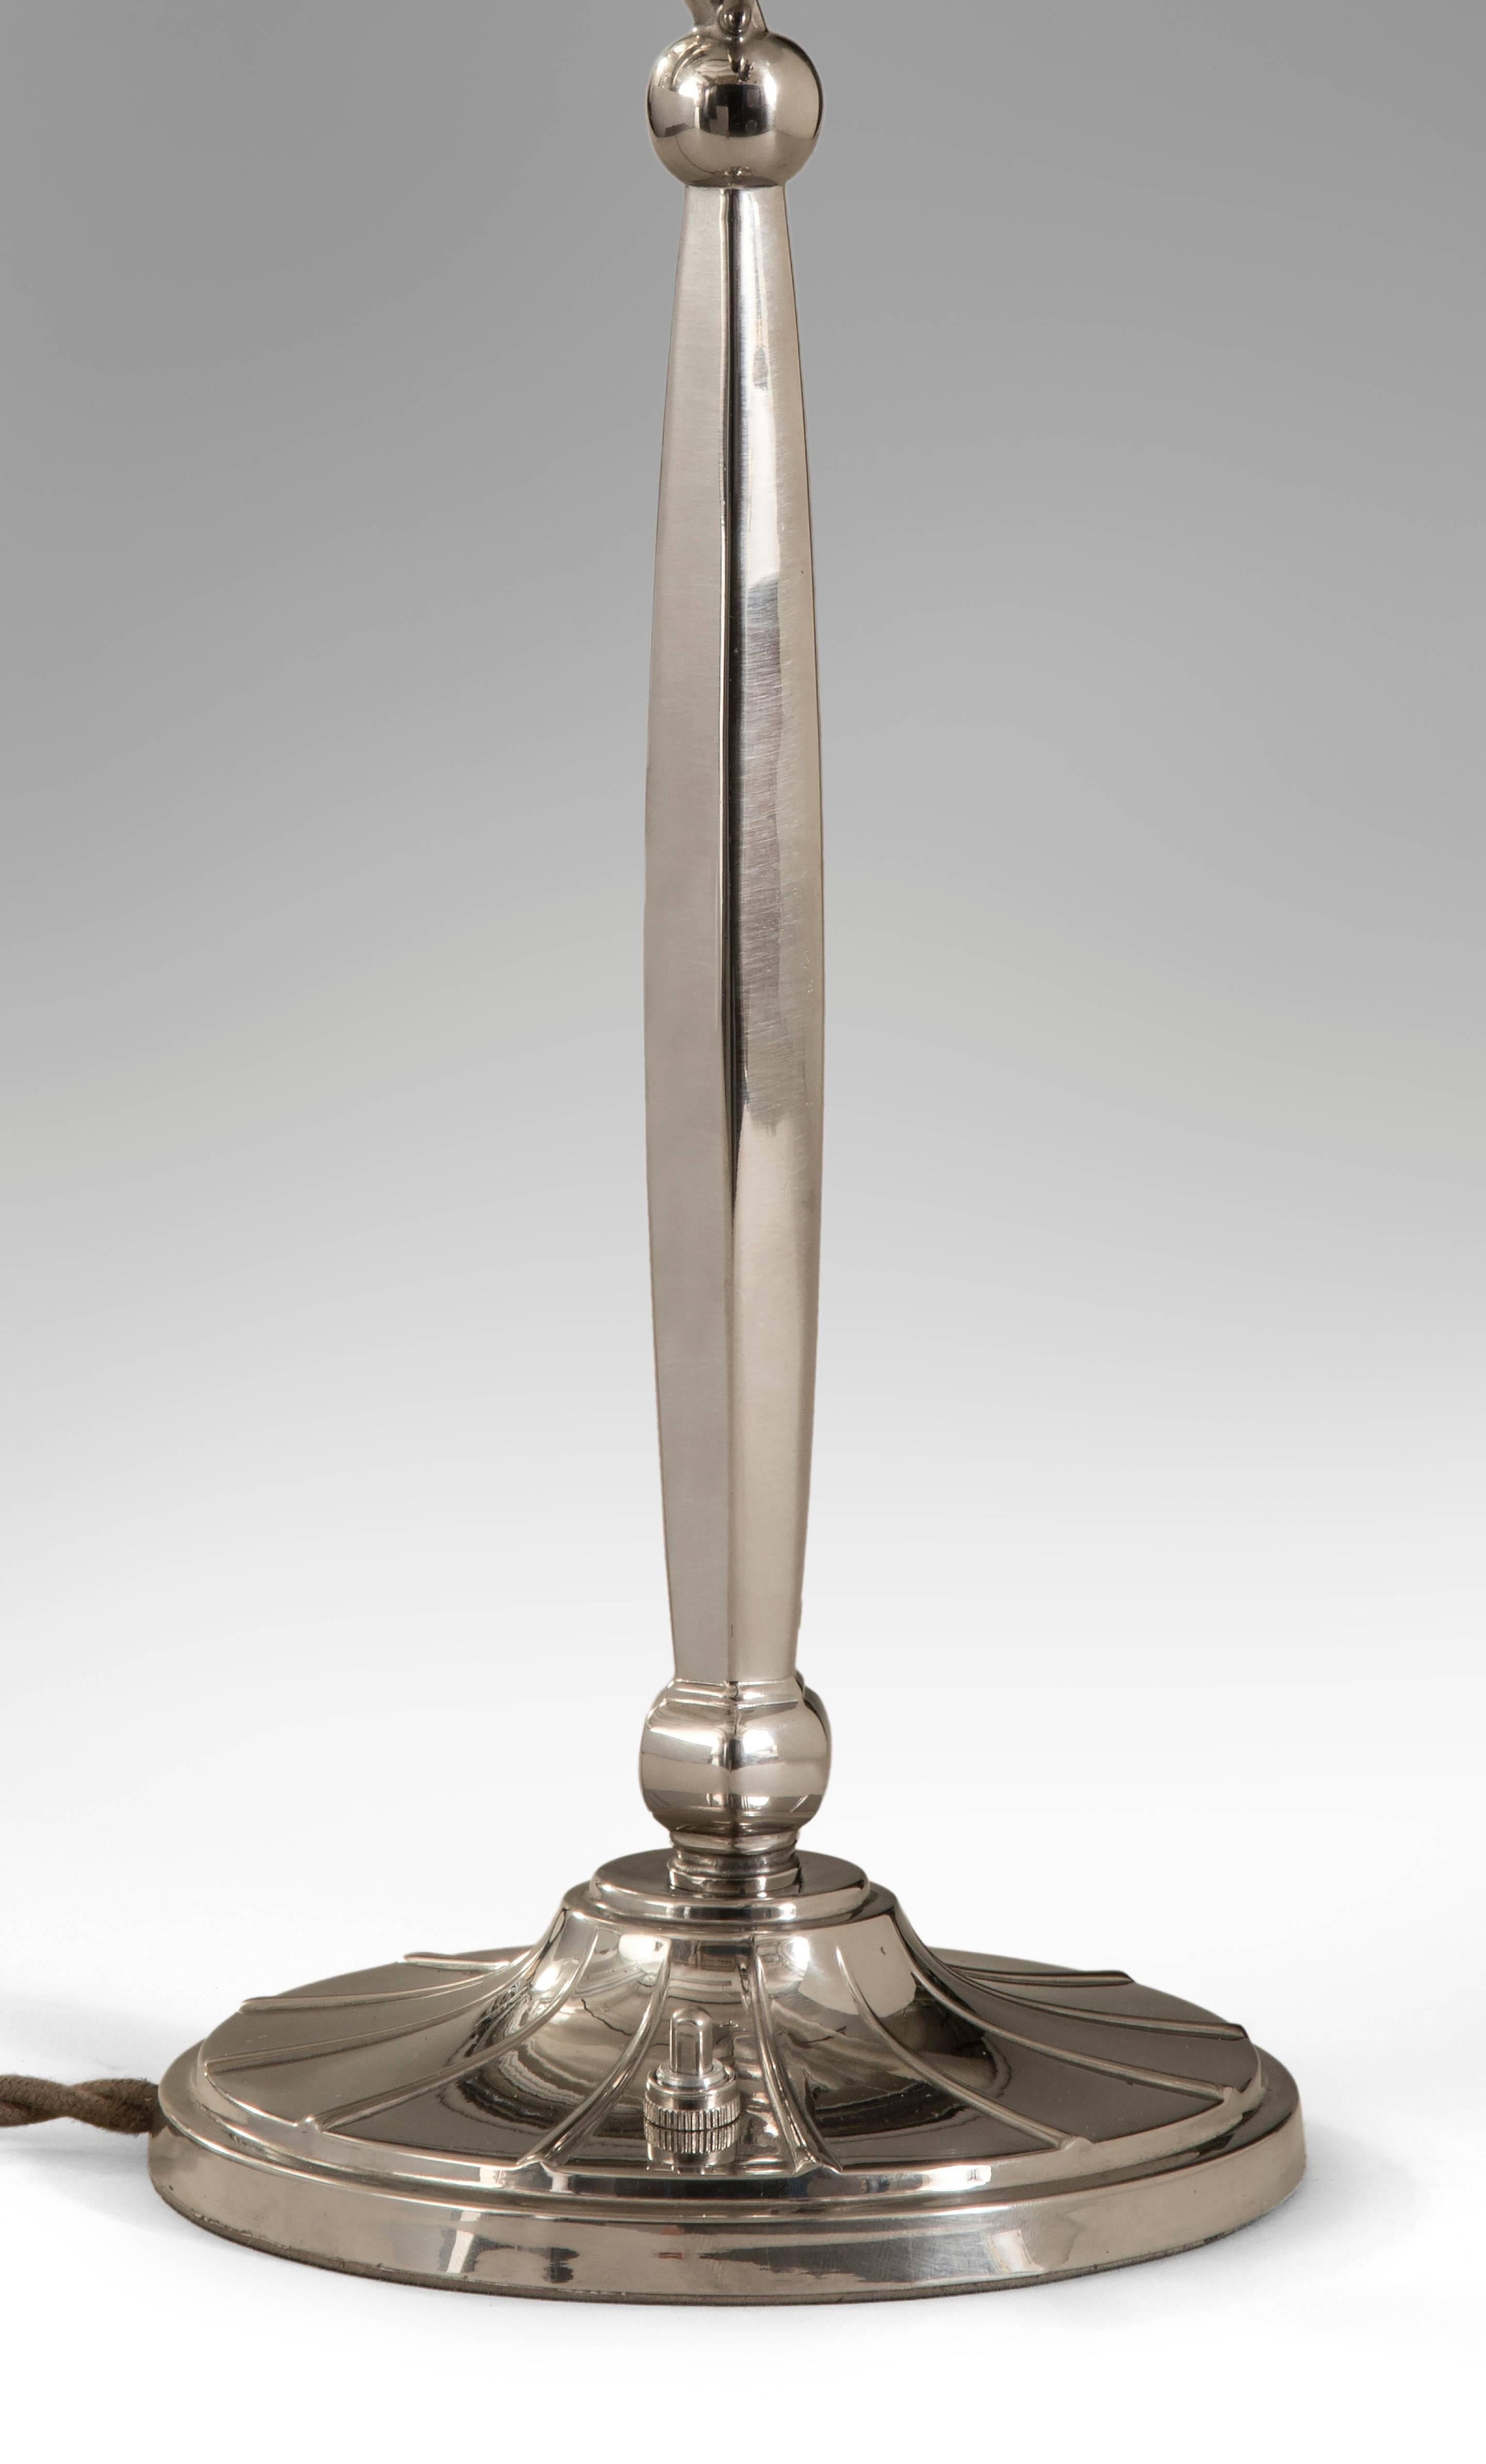 The pointed finial above a hexagonal standard, on fluted circular base. Signed on the base: C.G Hallberg.